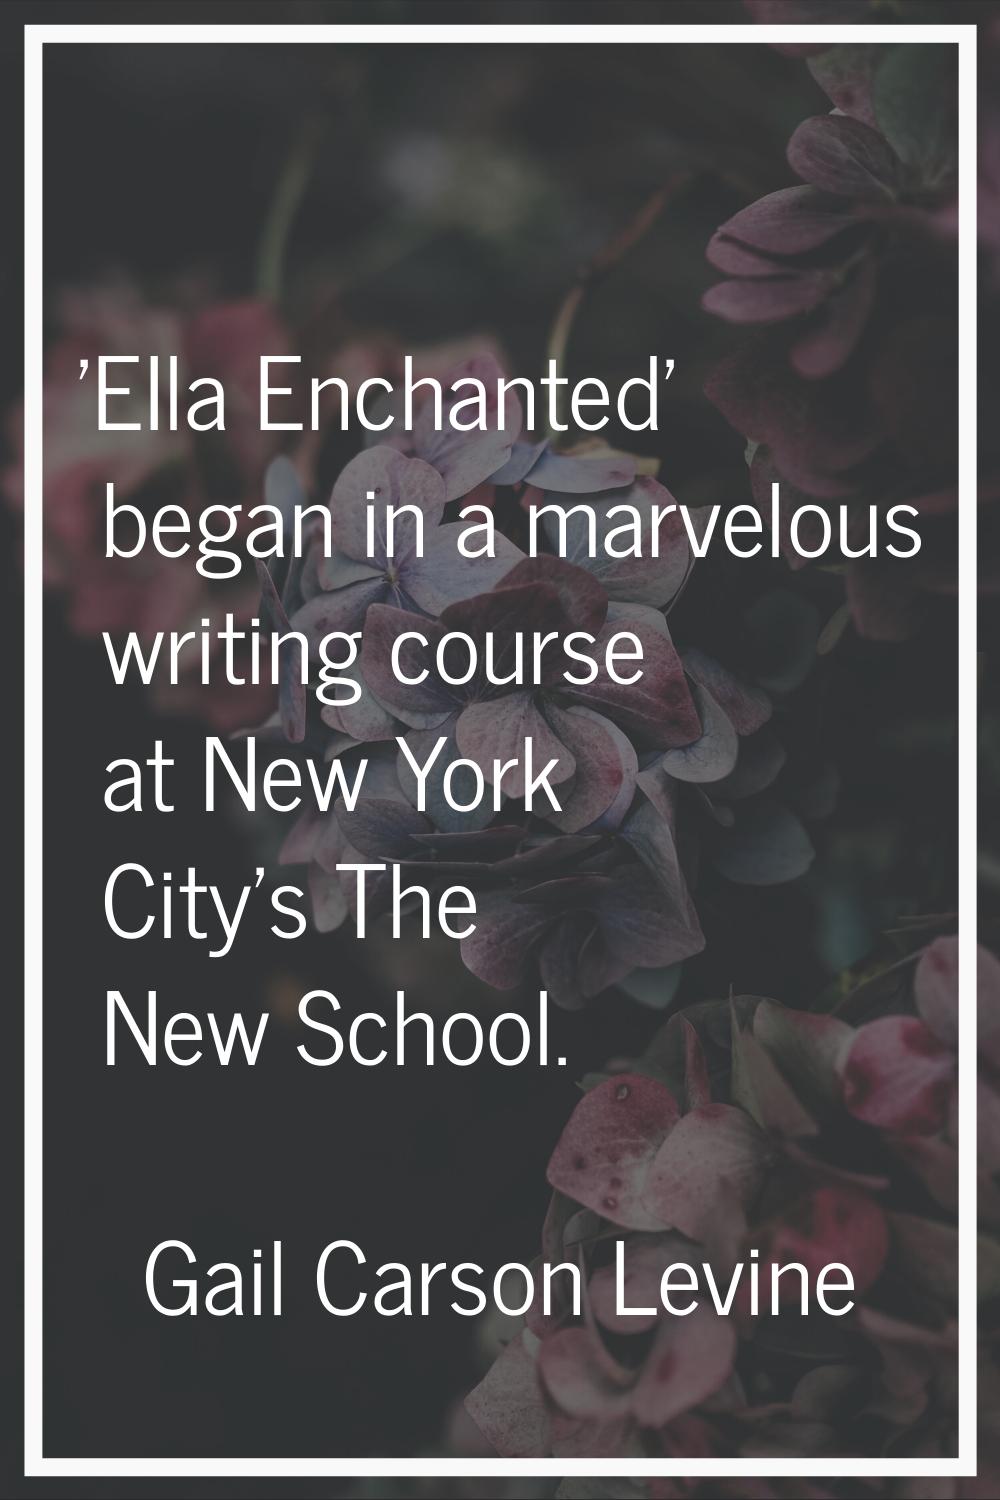 'EIla Enchanted' began in a marvelous writing course at New York City's The New School.